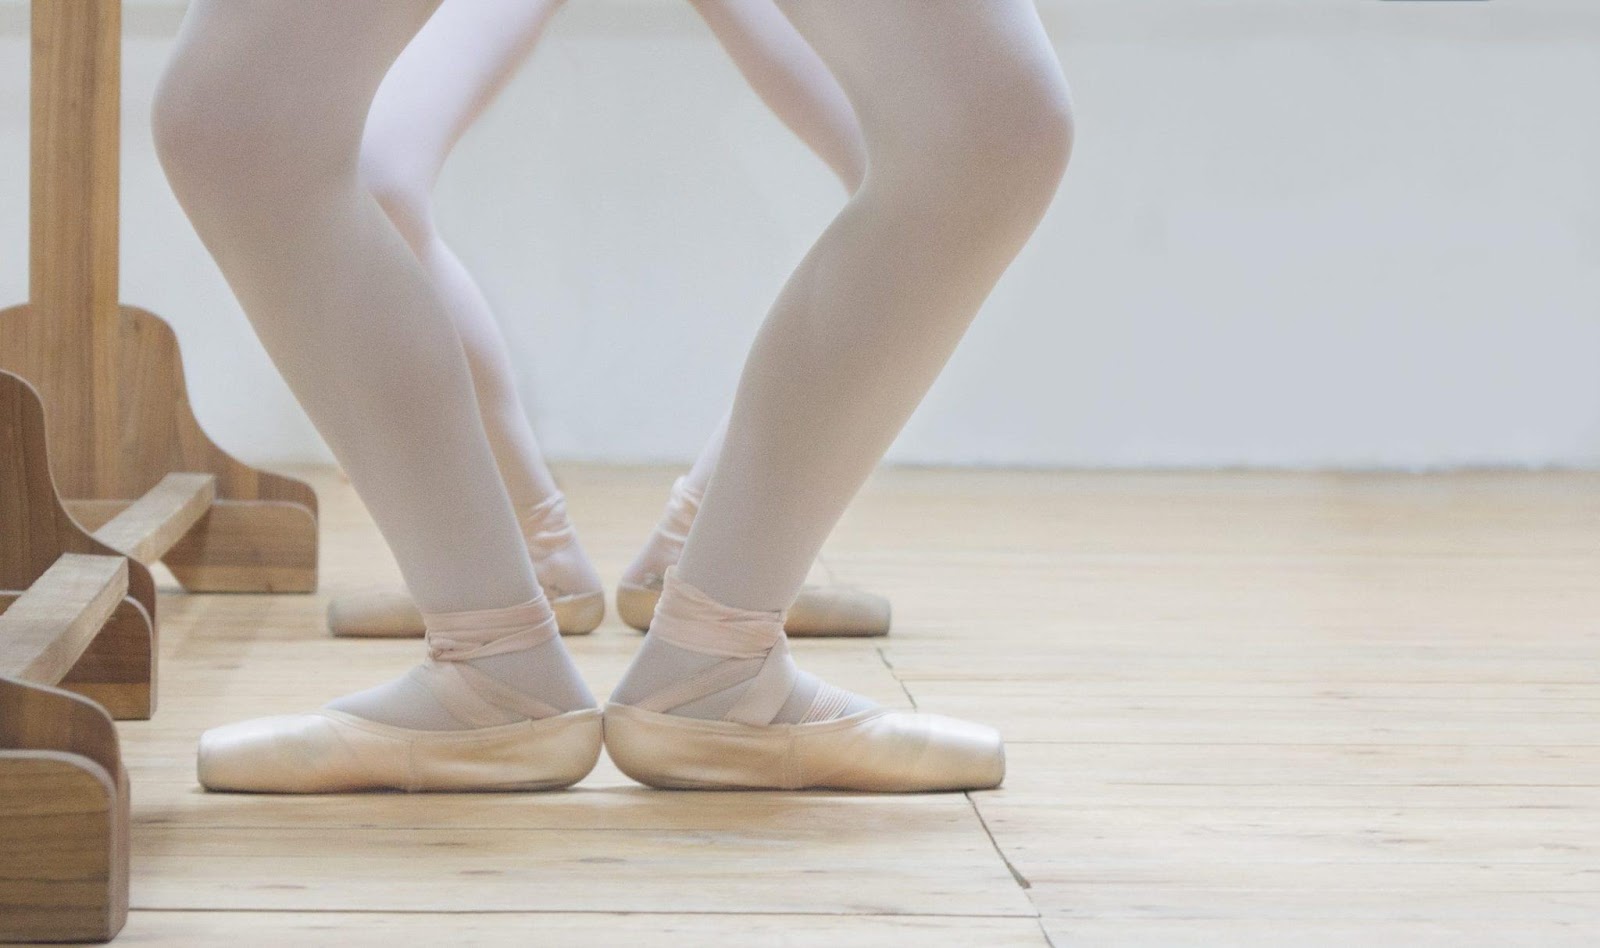 Foundational Ballet Moves for Beginners - Plié (Plee-ay)